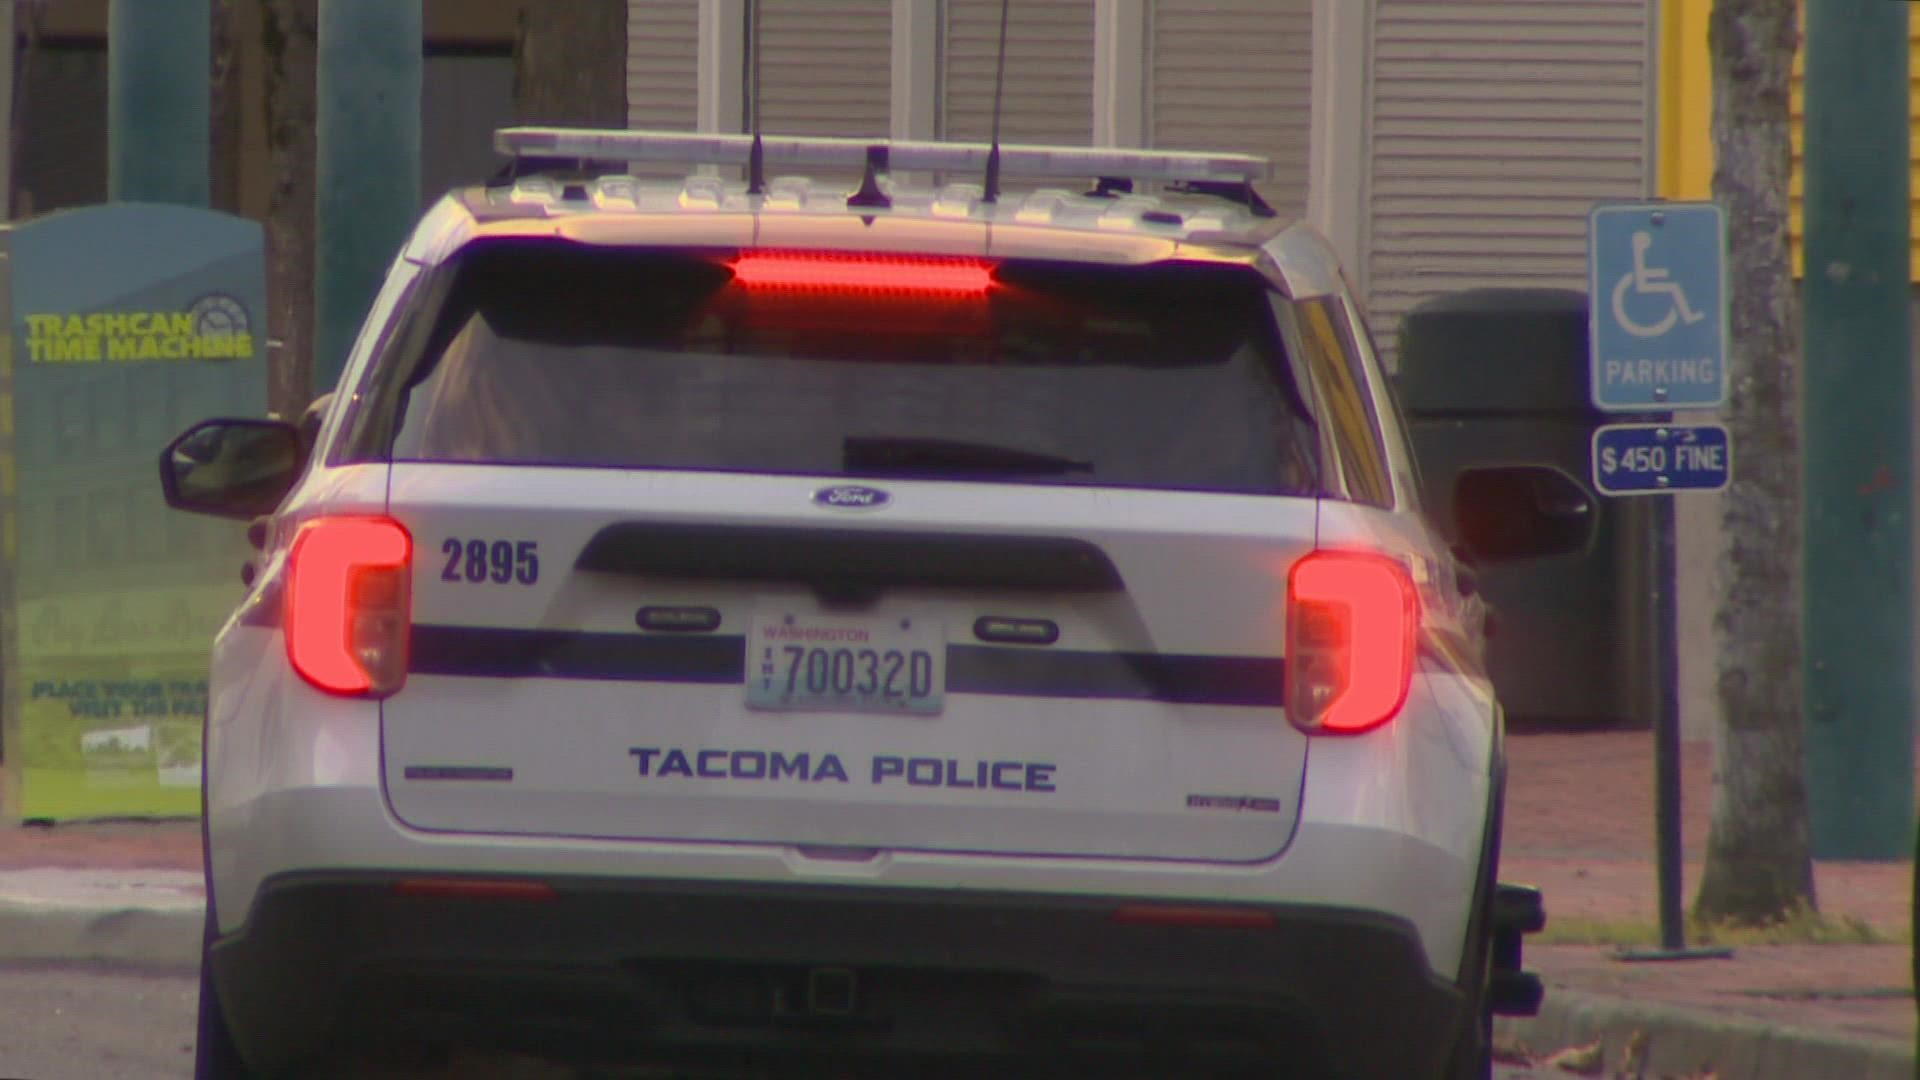 Tacoma saw a 43 percent decrease in crime in March compared to the month before according to the chief.